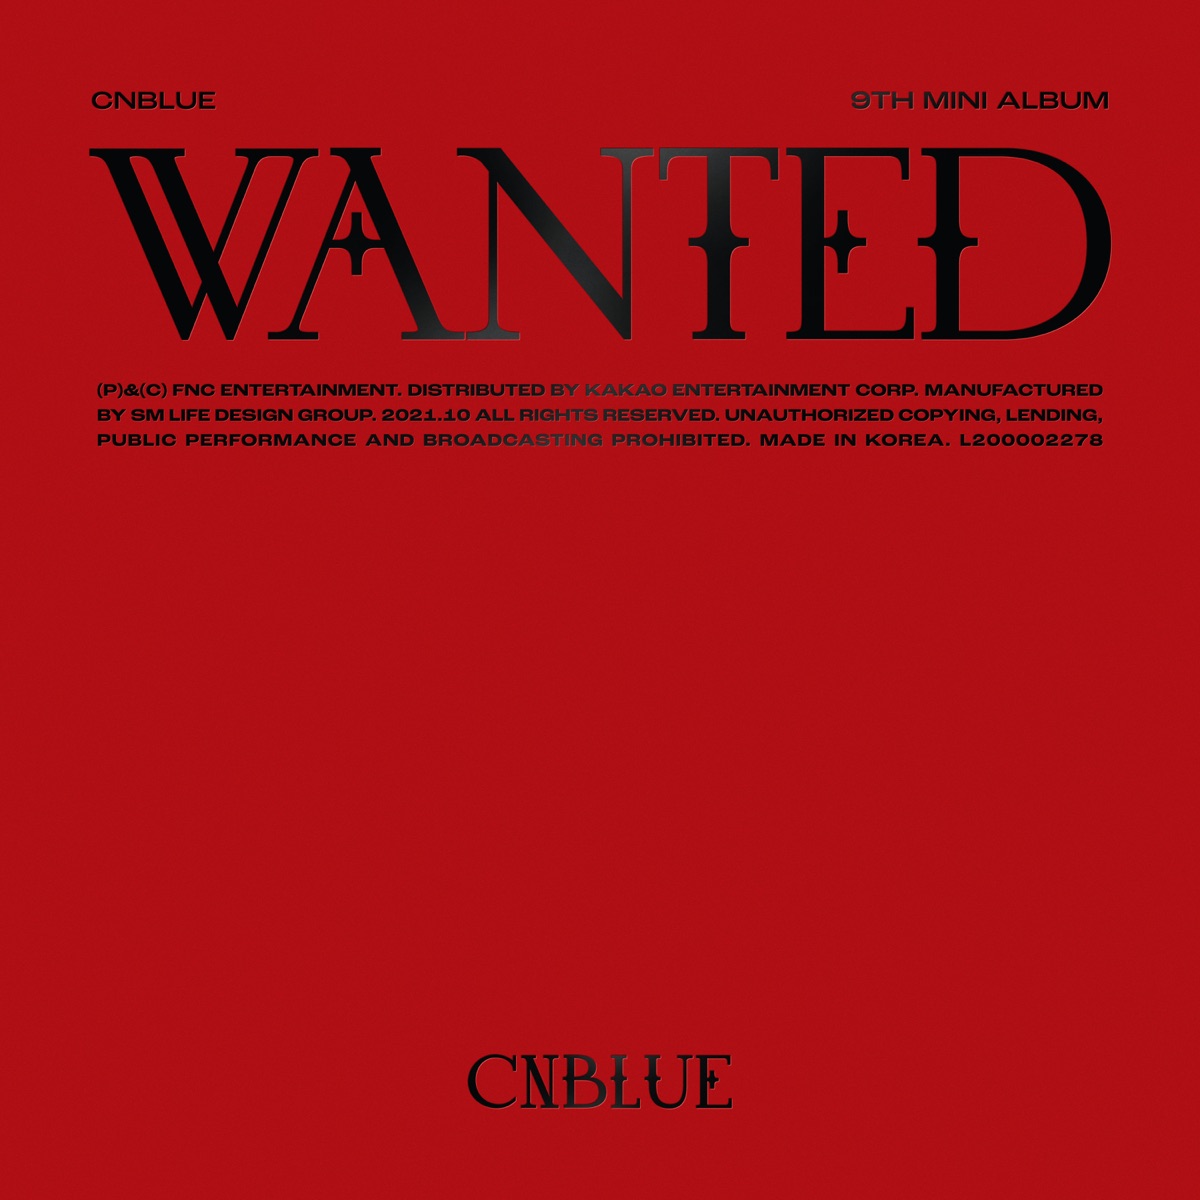 Cover for『CNBLUE - Hold Me Back』from the release『WANTED』